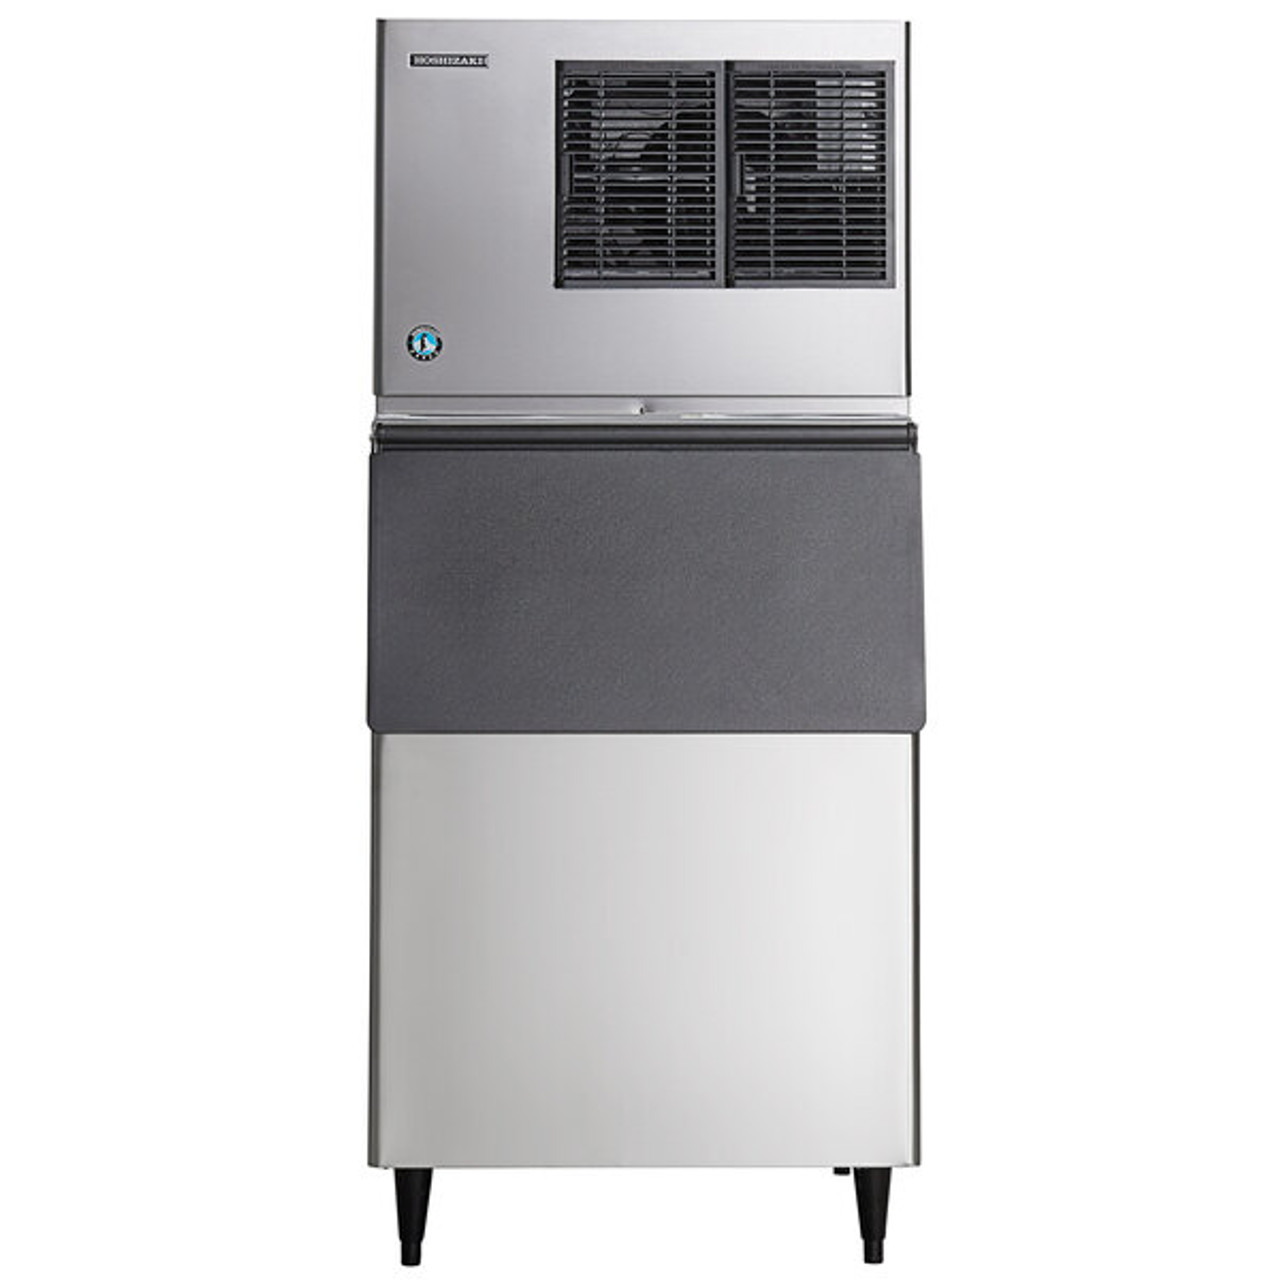 Hoshizaki KML-700MAJ Low Profile 30" Air Cooled Crescent Cube Ice Machine with Stainless Steel Finish Ice Storage Bin - 658 lb. Per Day, 500 lb. Storage